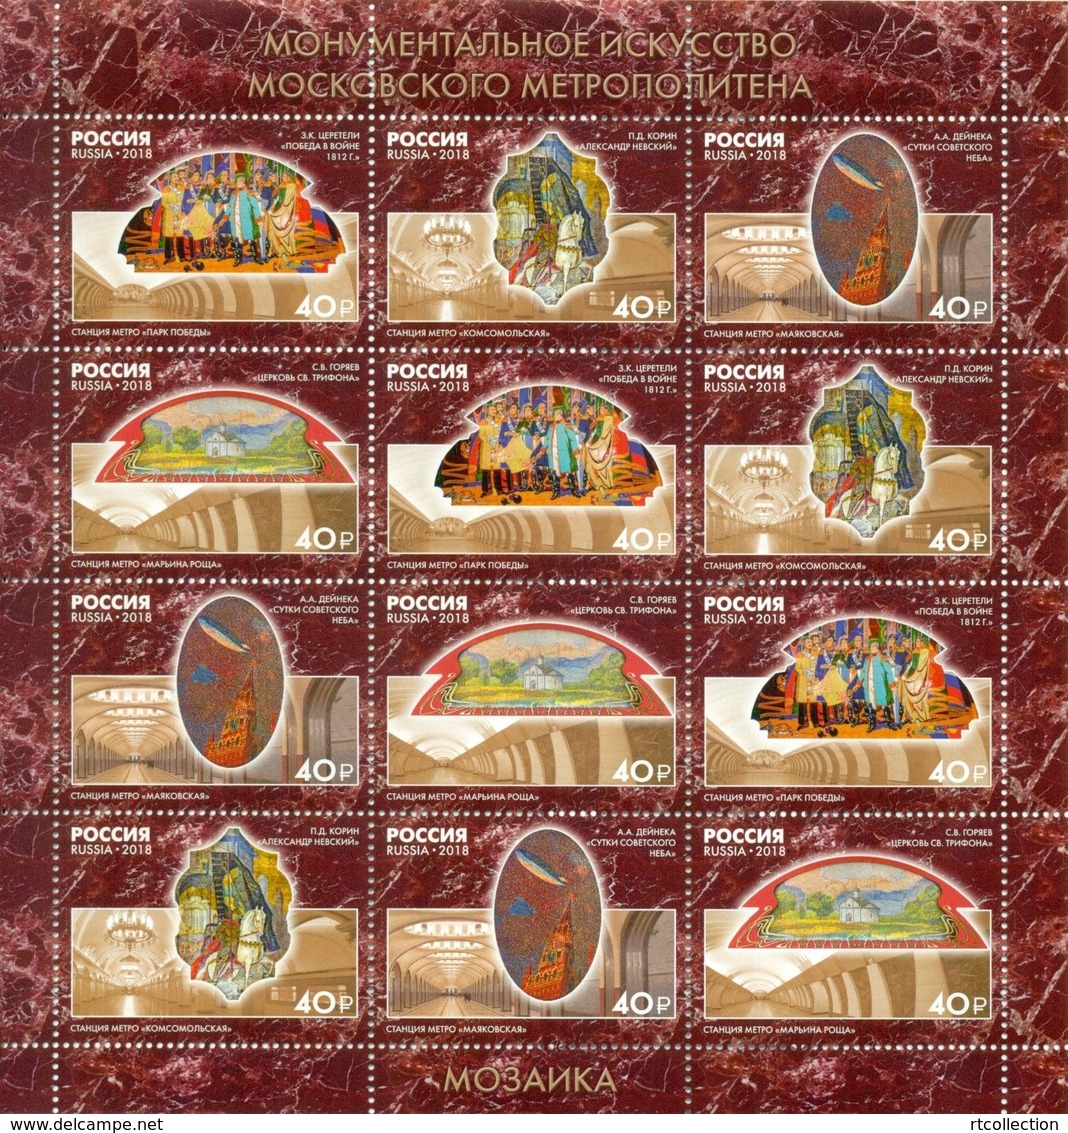 Russia 2018 Sheet Monumental Art Moscow Metro Station Architecture Subway Cultures Transport Train Stamps MNH Mi 2584-87 - Trains